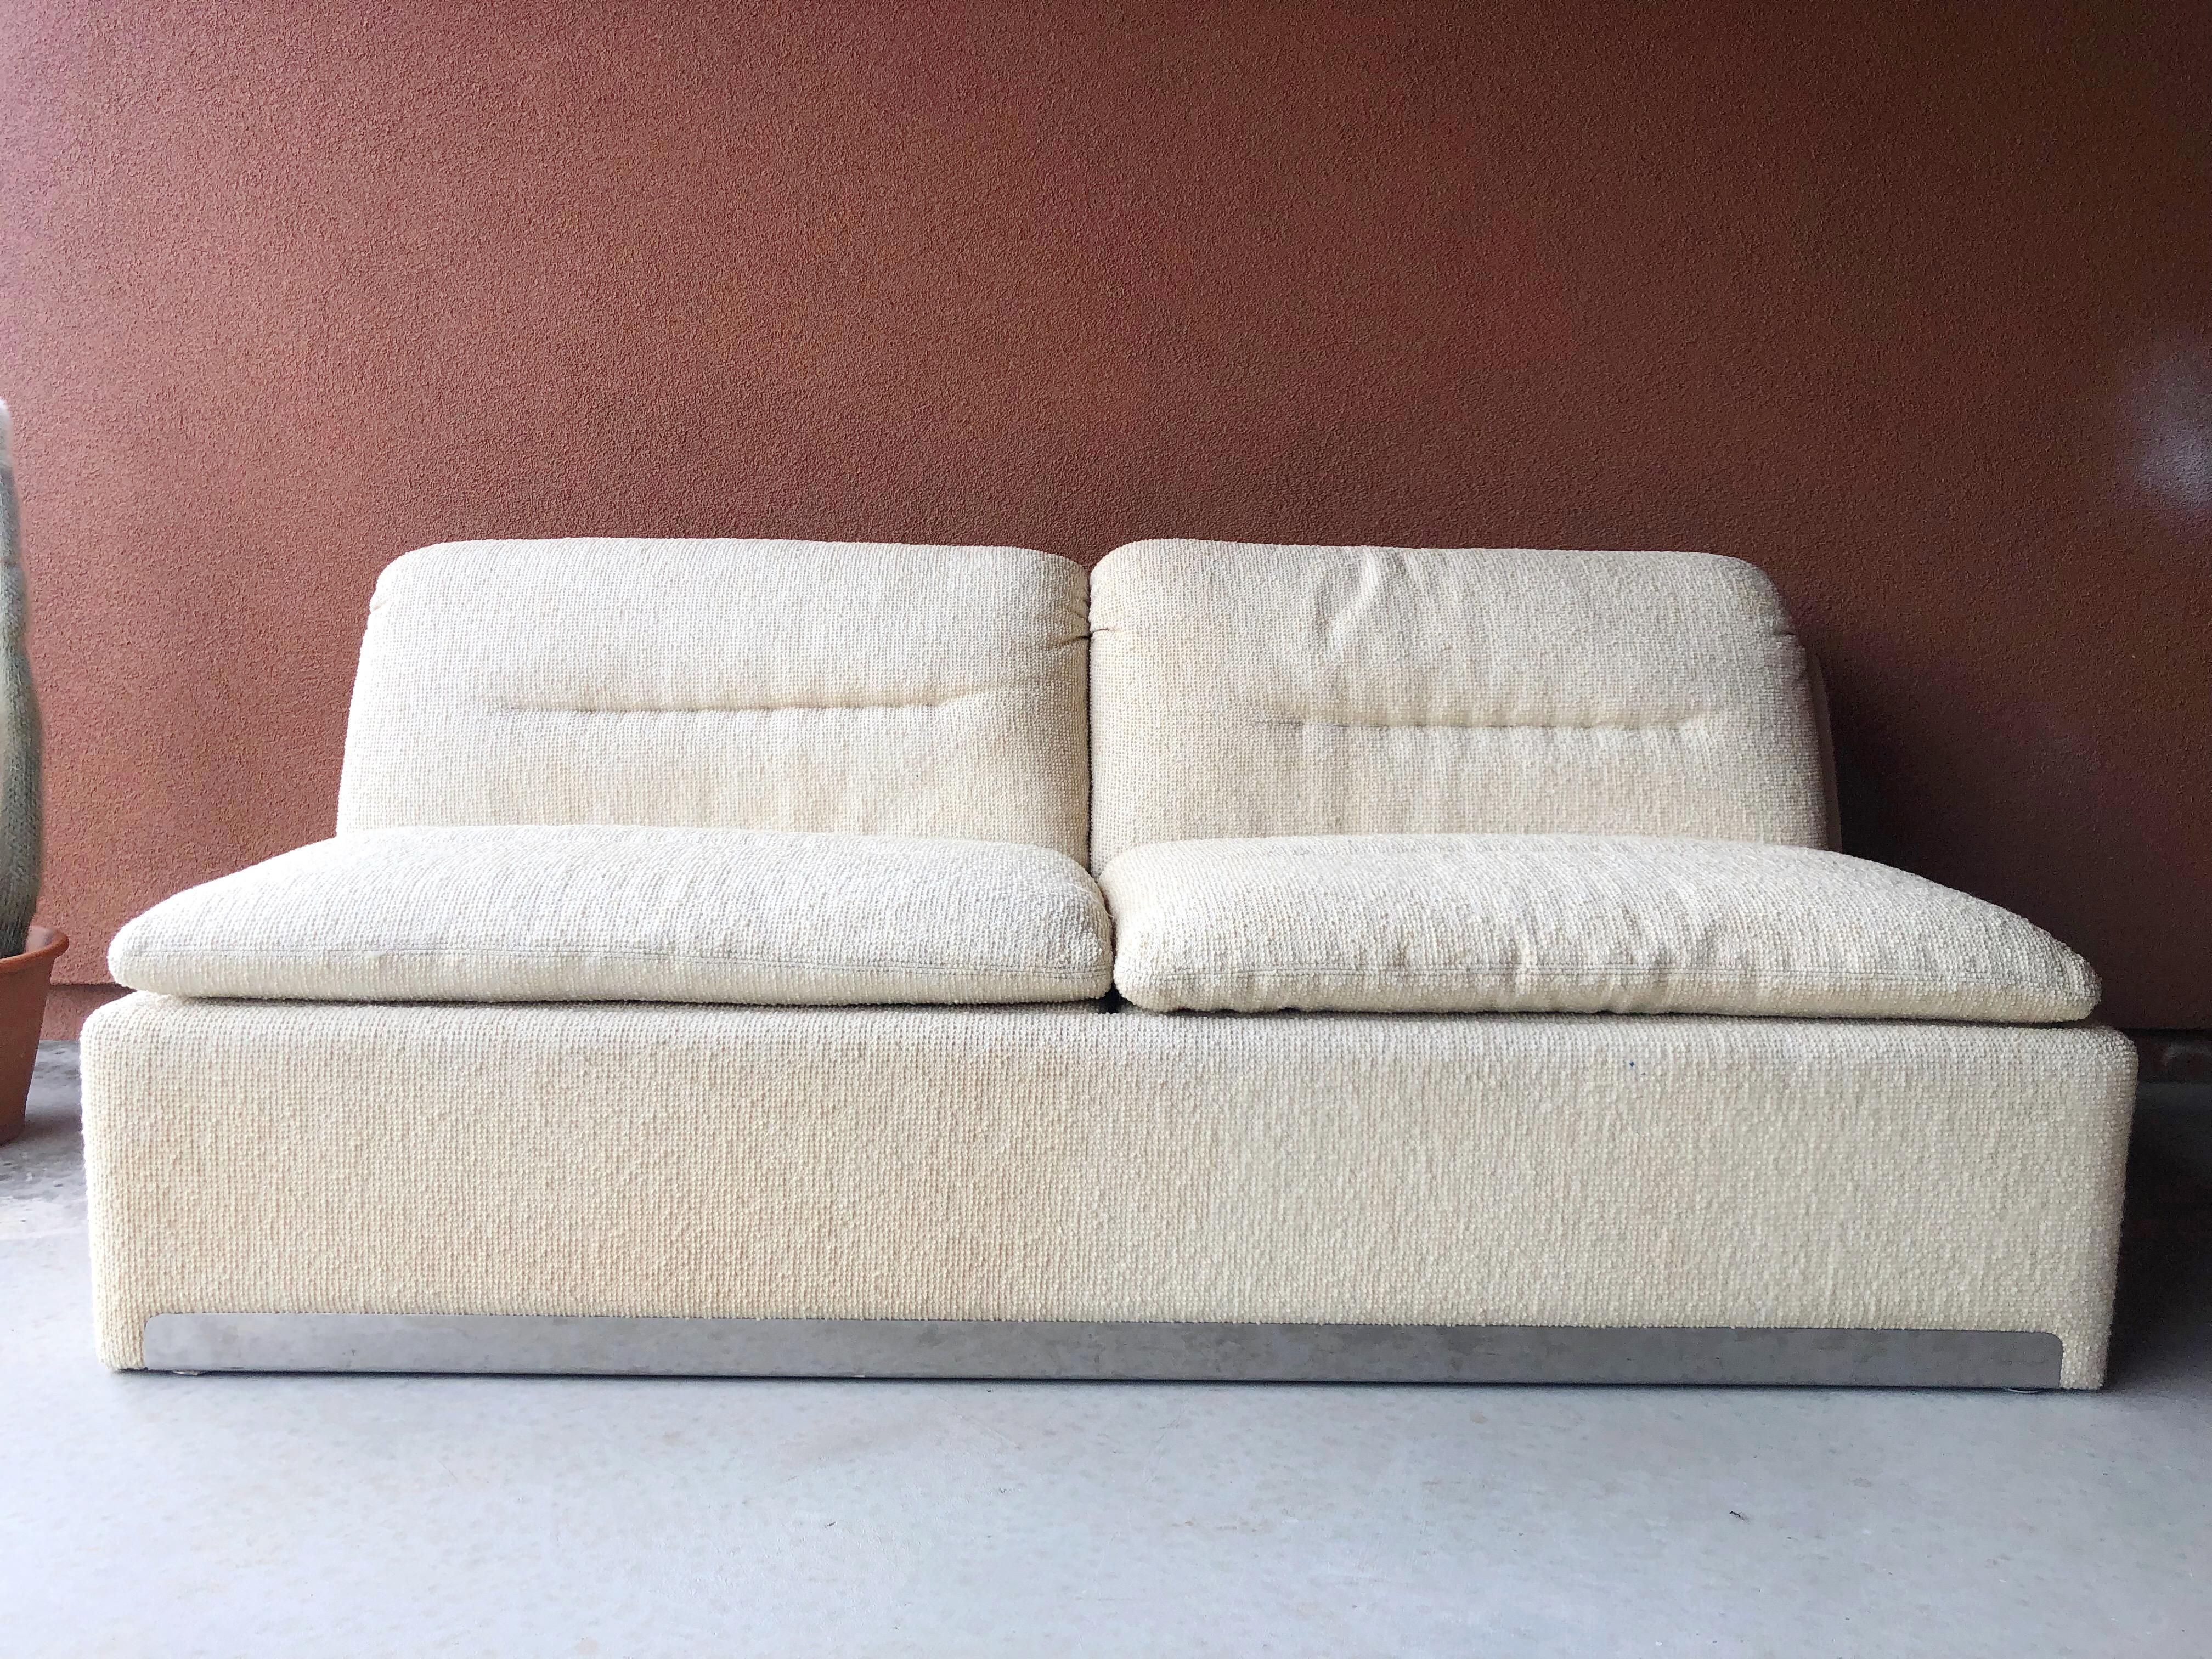 Saporiti 'Proposals' modular armchair or loveseat sofa, in a rich ivory boucle fabric. Model P10 design, circa 1970s. This loveseat features an upholstered steel base frame, with an L shaped seat, and armless modular design. Lovely and comfortable